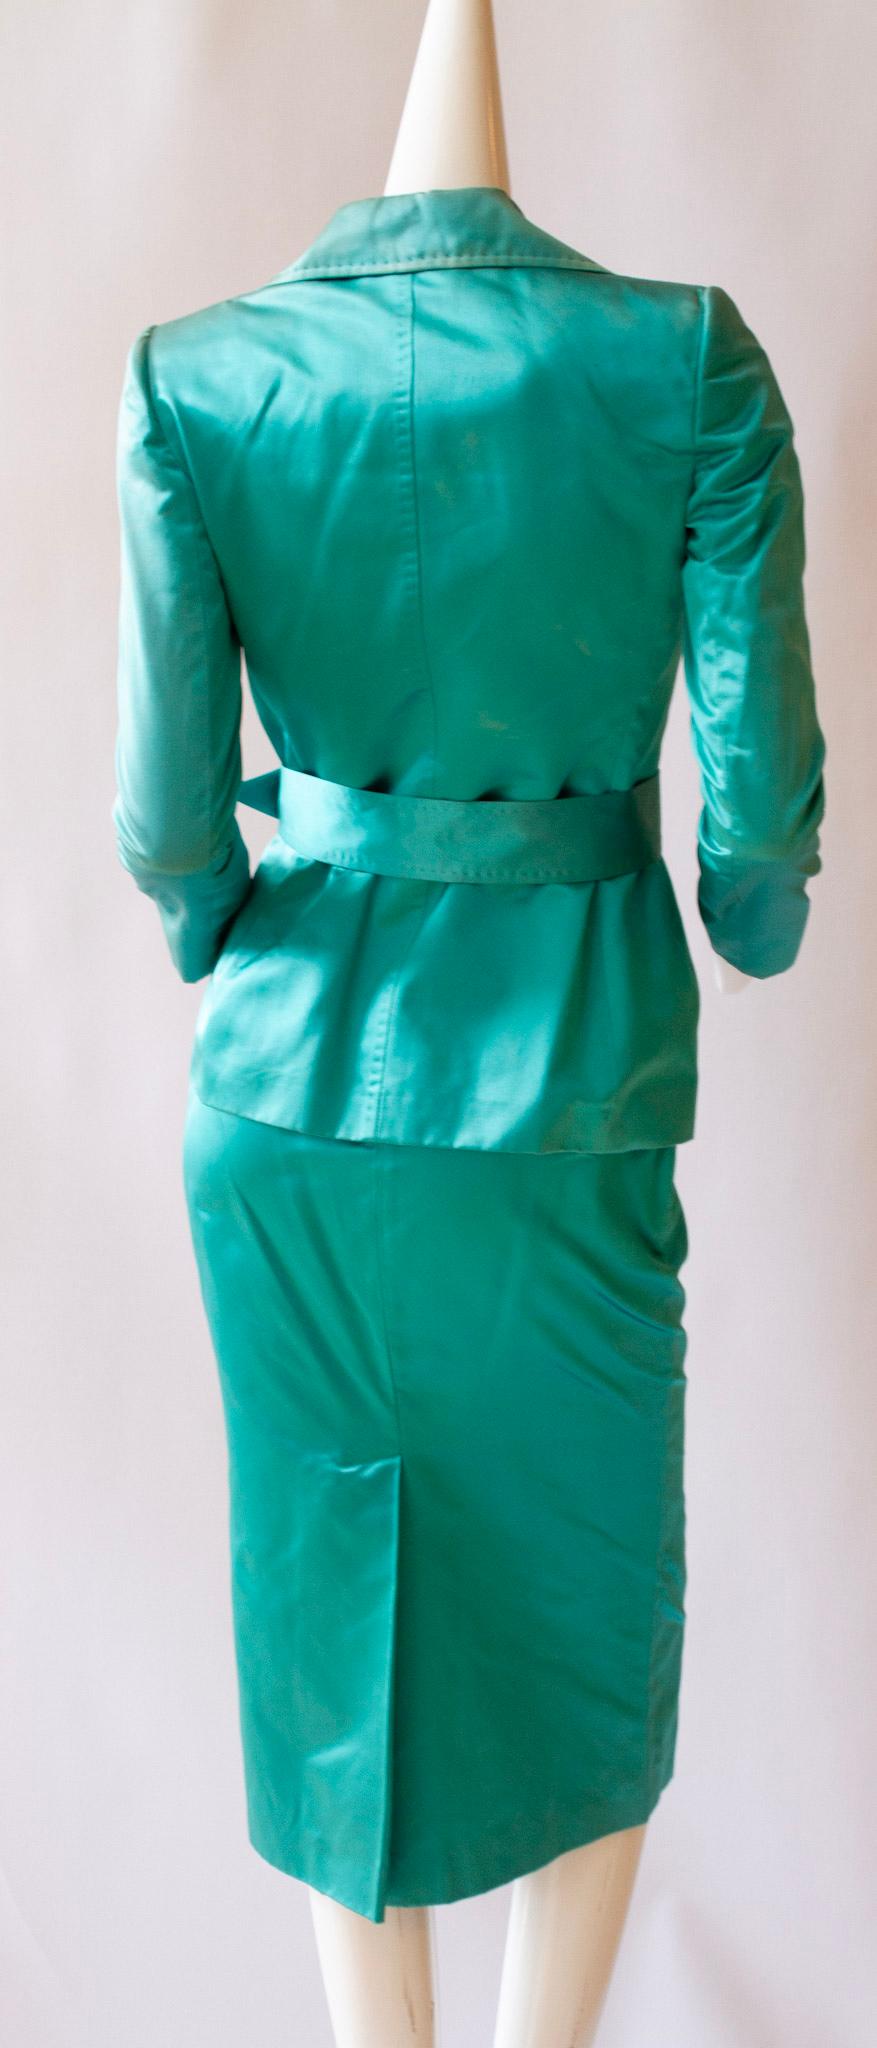 Dolce & Gabbana, Two Piece 100% Silk Turquoise Skirt Suit Ensemble  For Sale 4